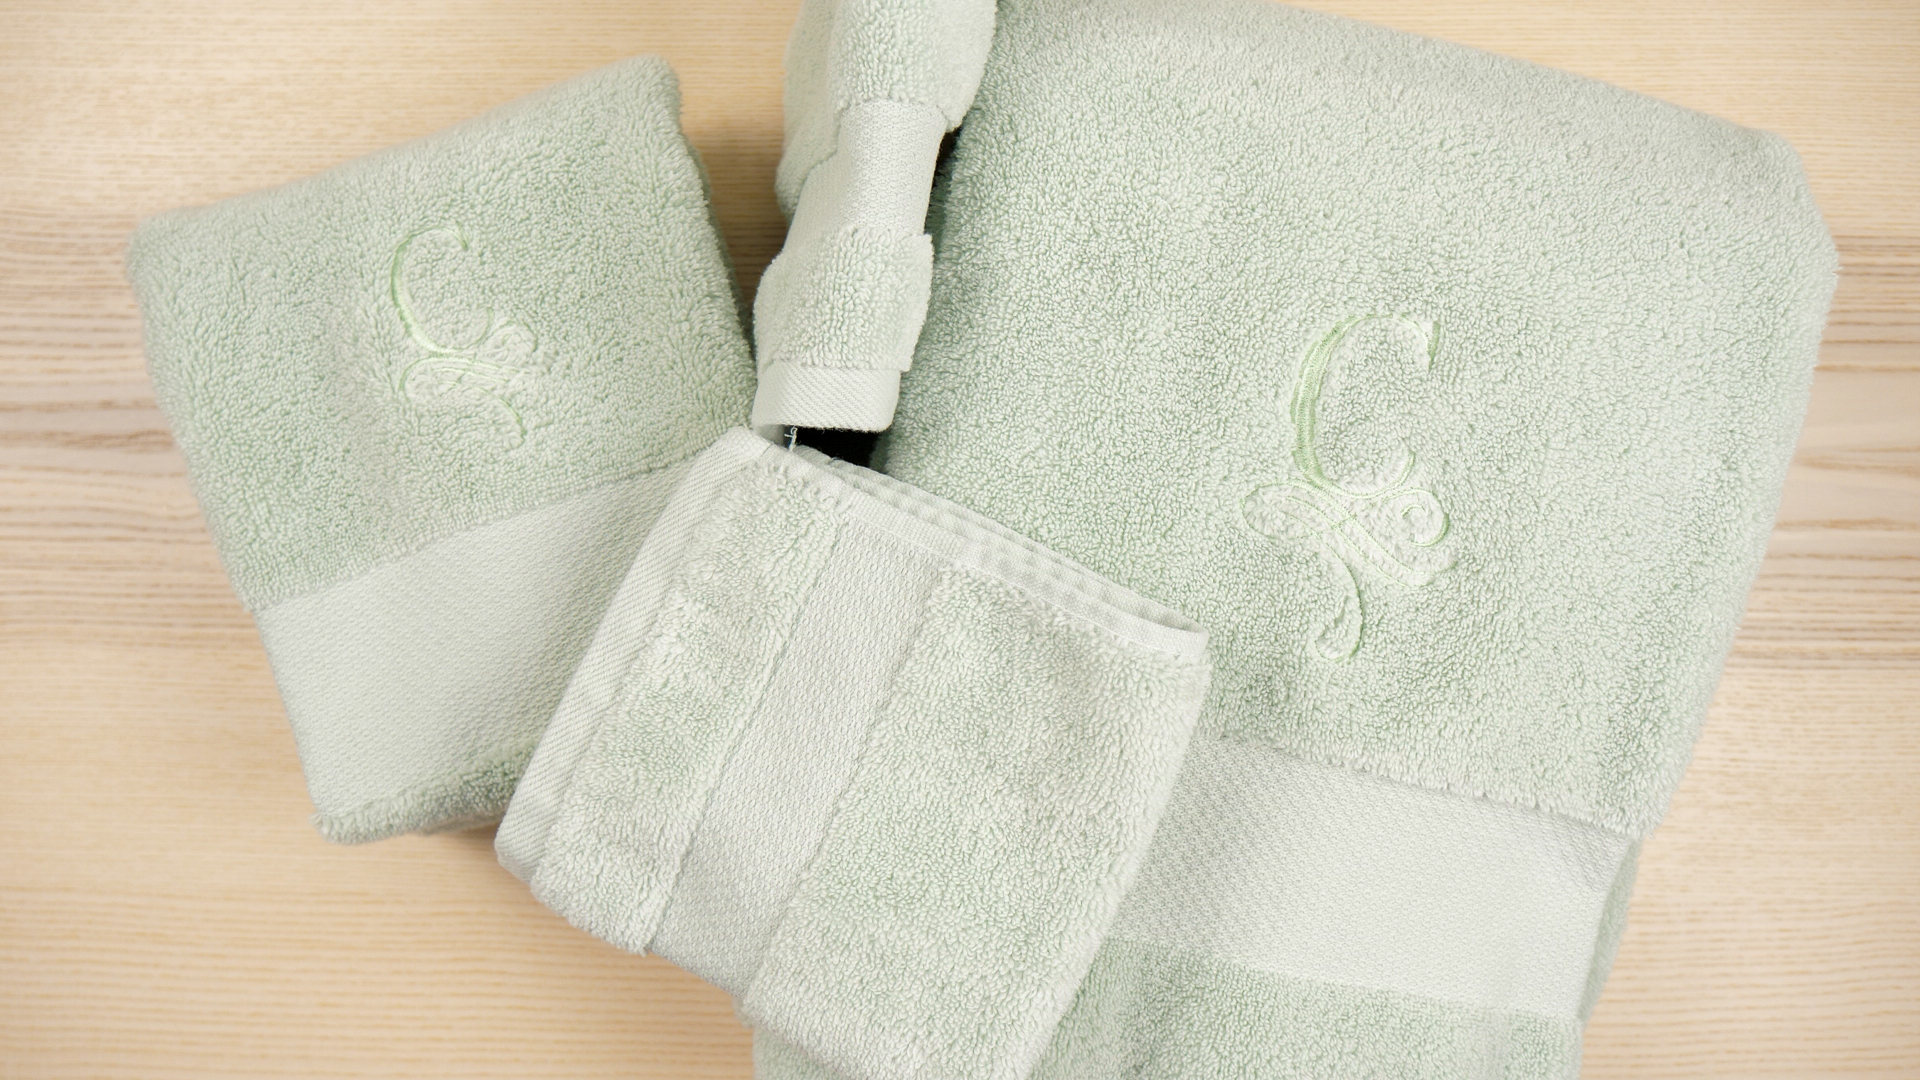 Embroidering Towel Set Updated Tutorial.00_06_19_16.Still003